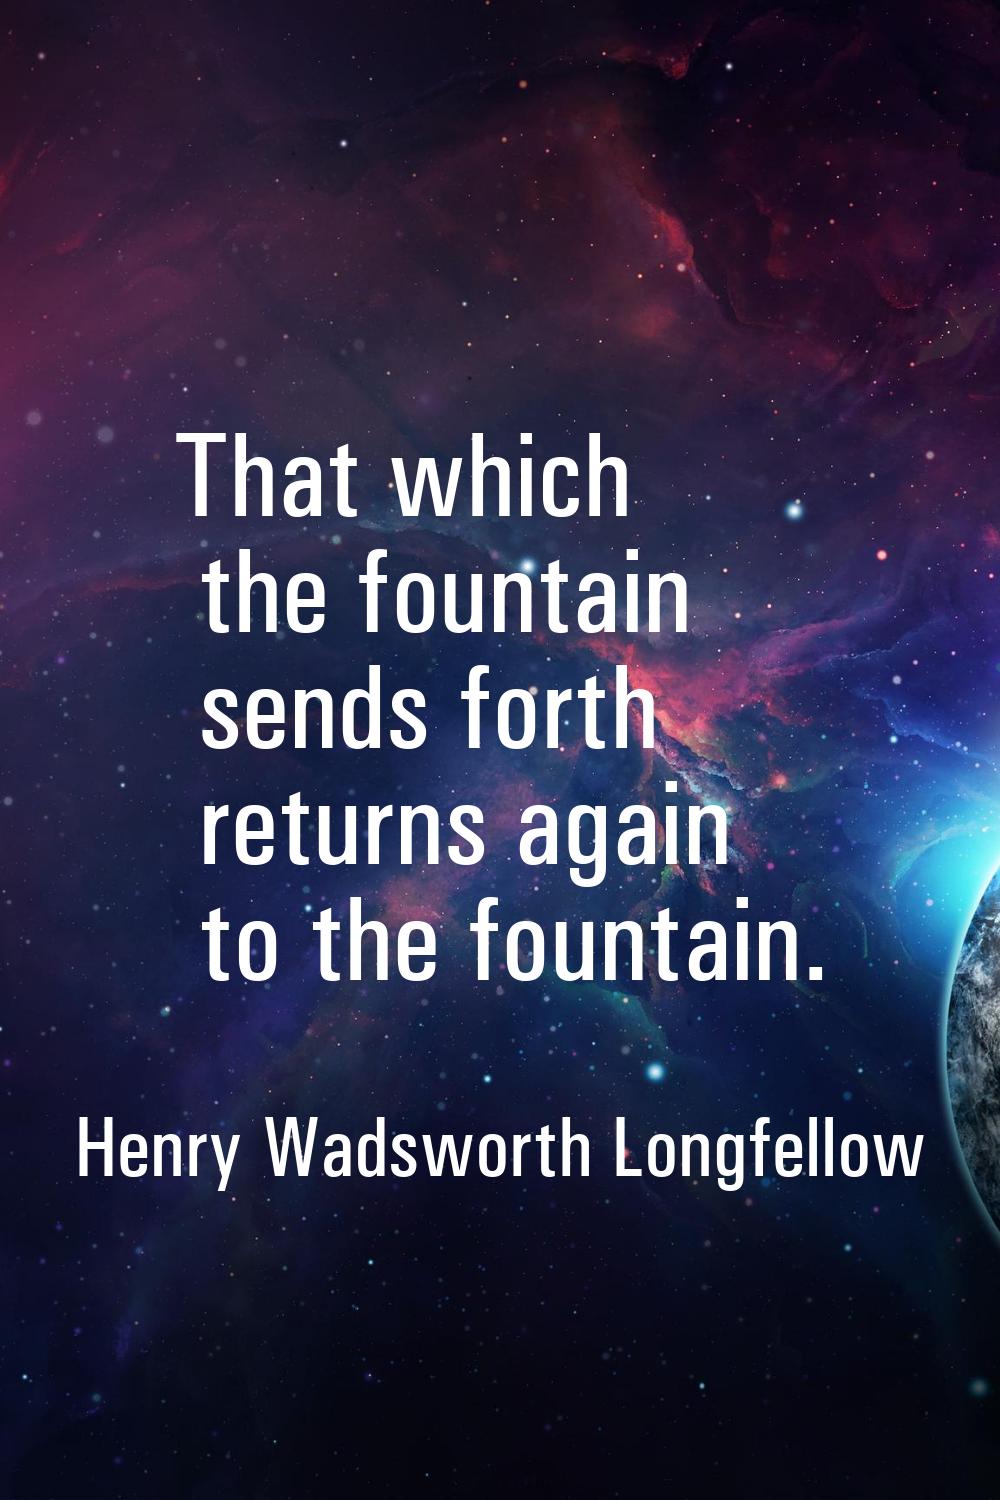 That which the fountain sends forth returns again to the fountain.